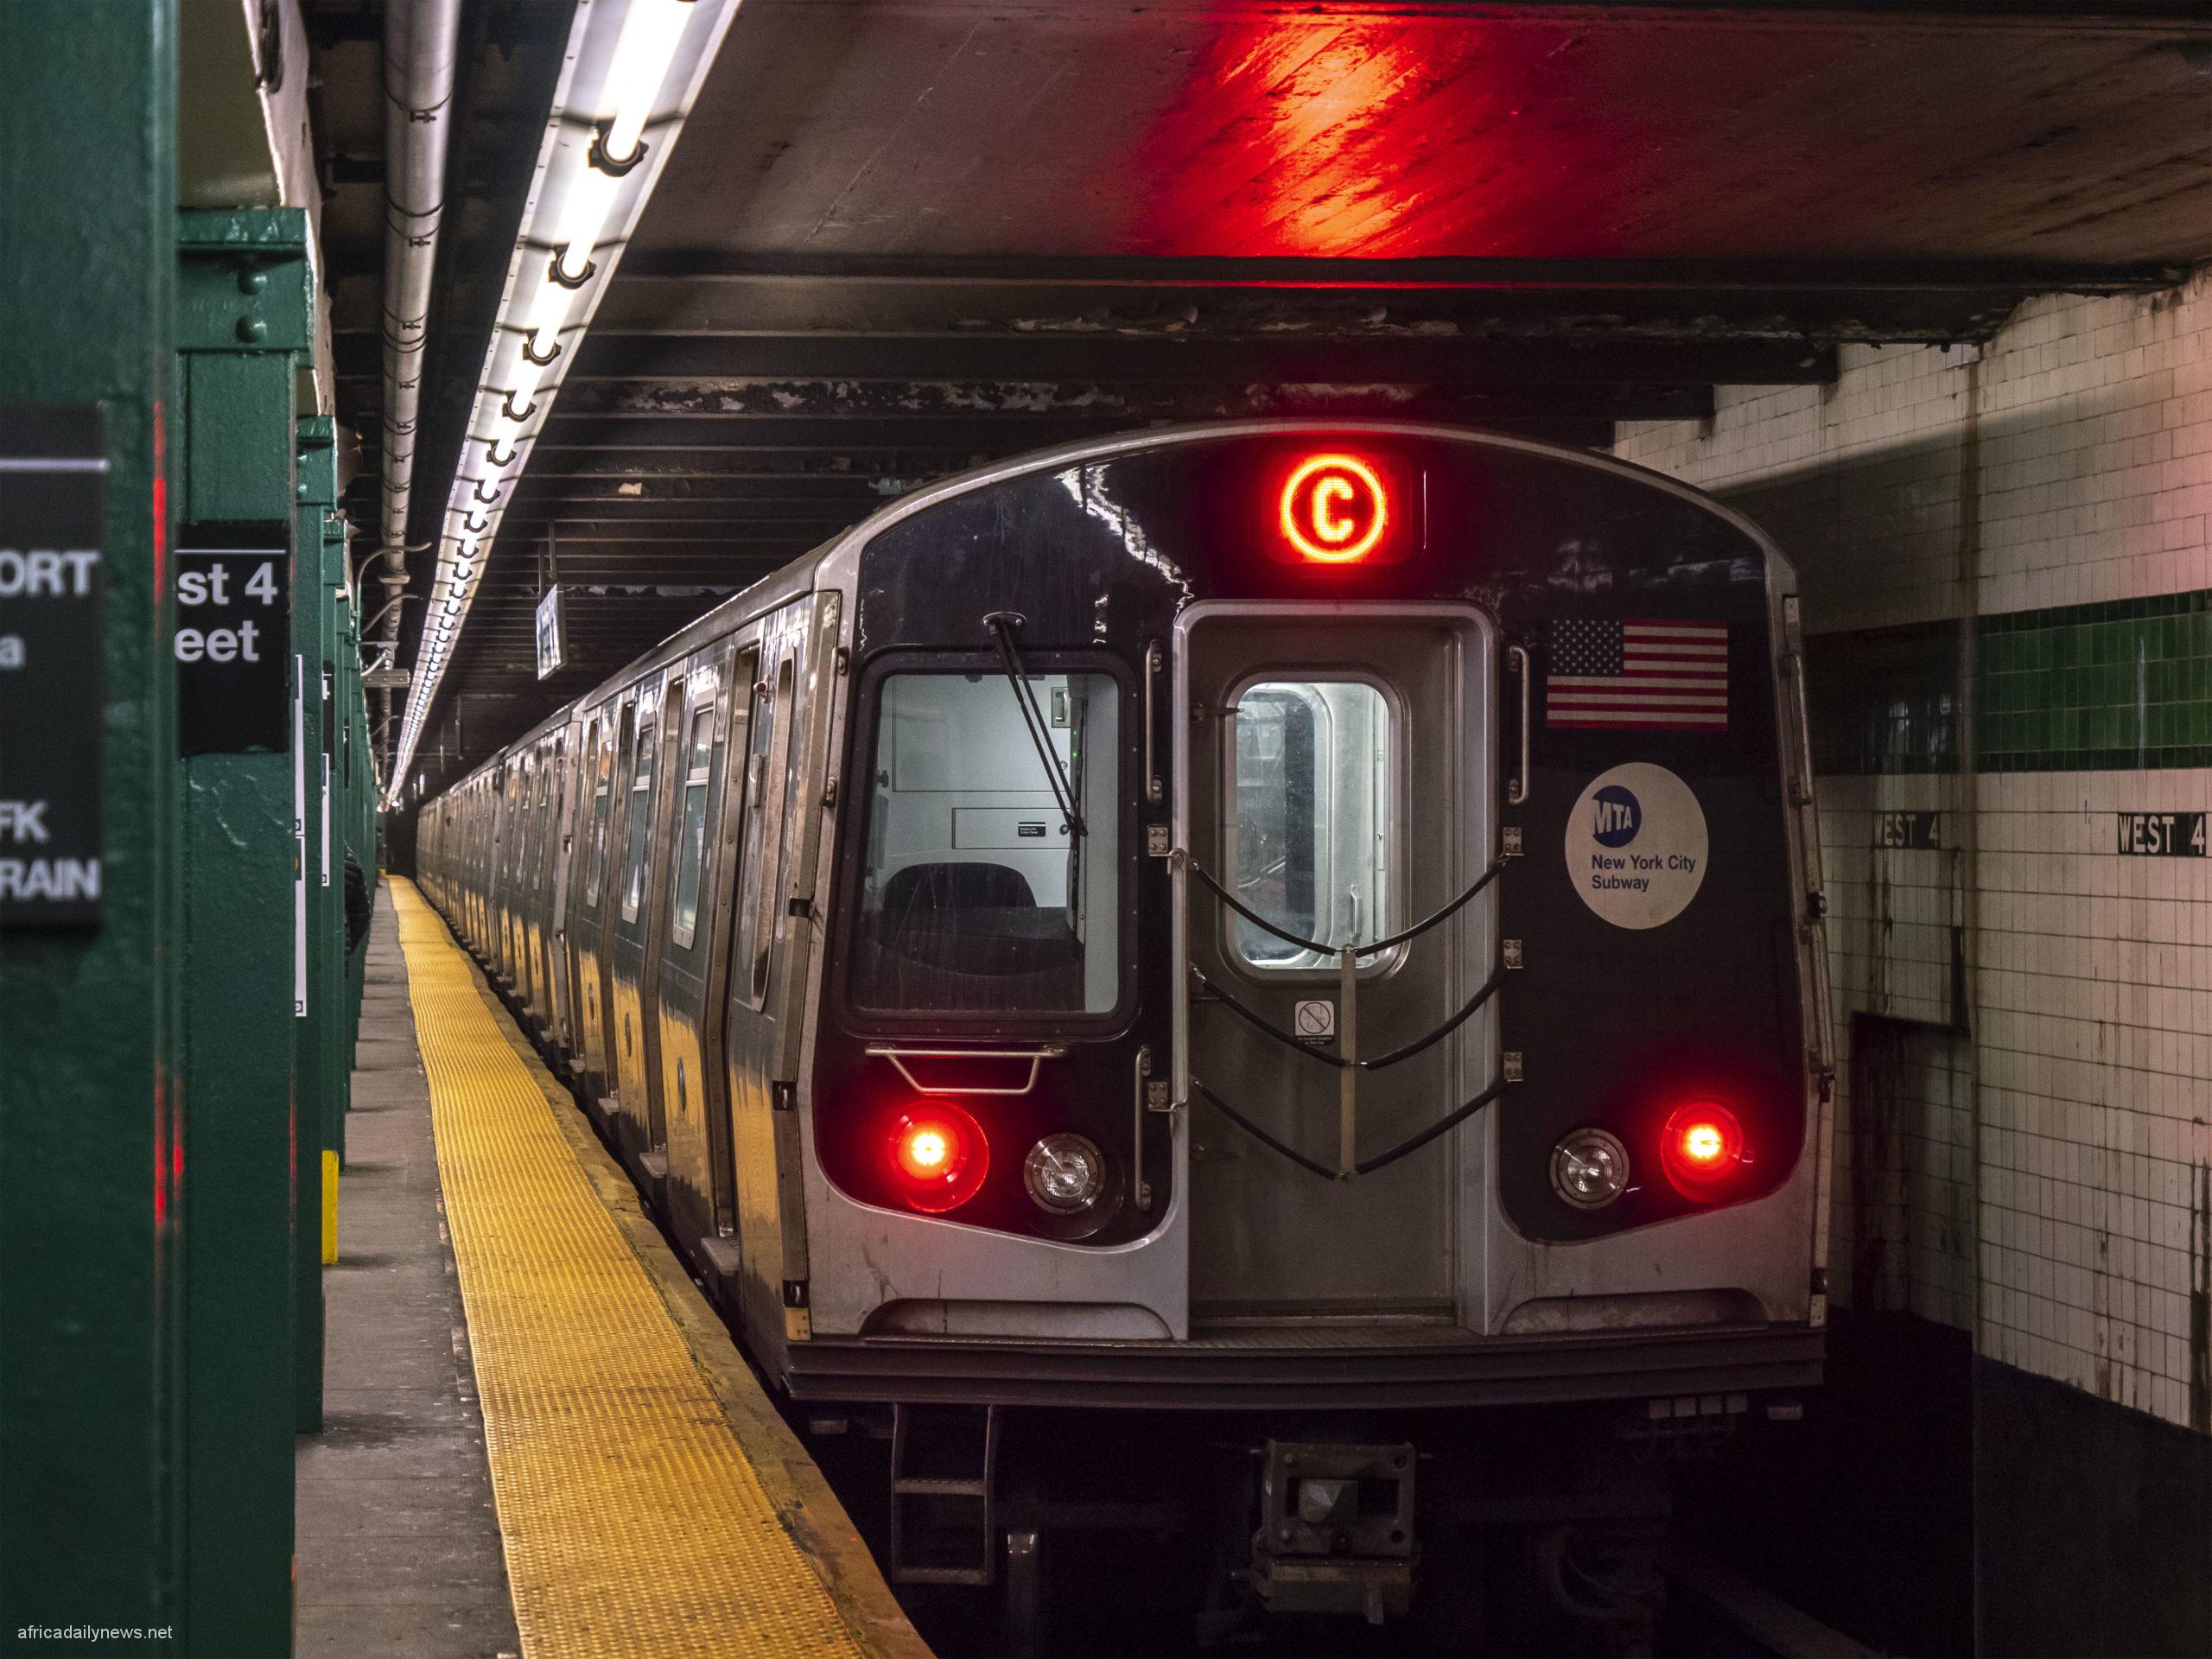 Train Crushes Man To Death In New York Over Phone